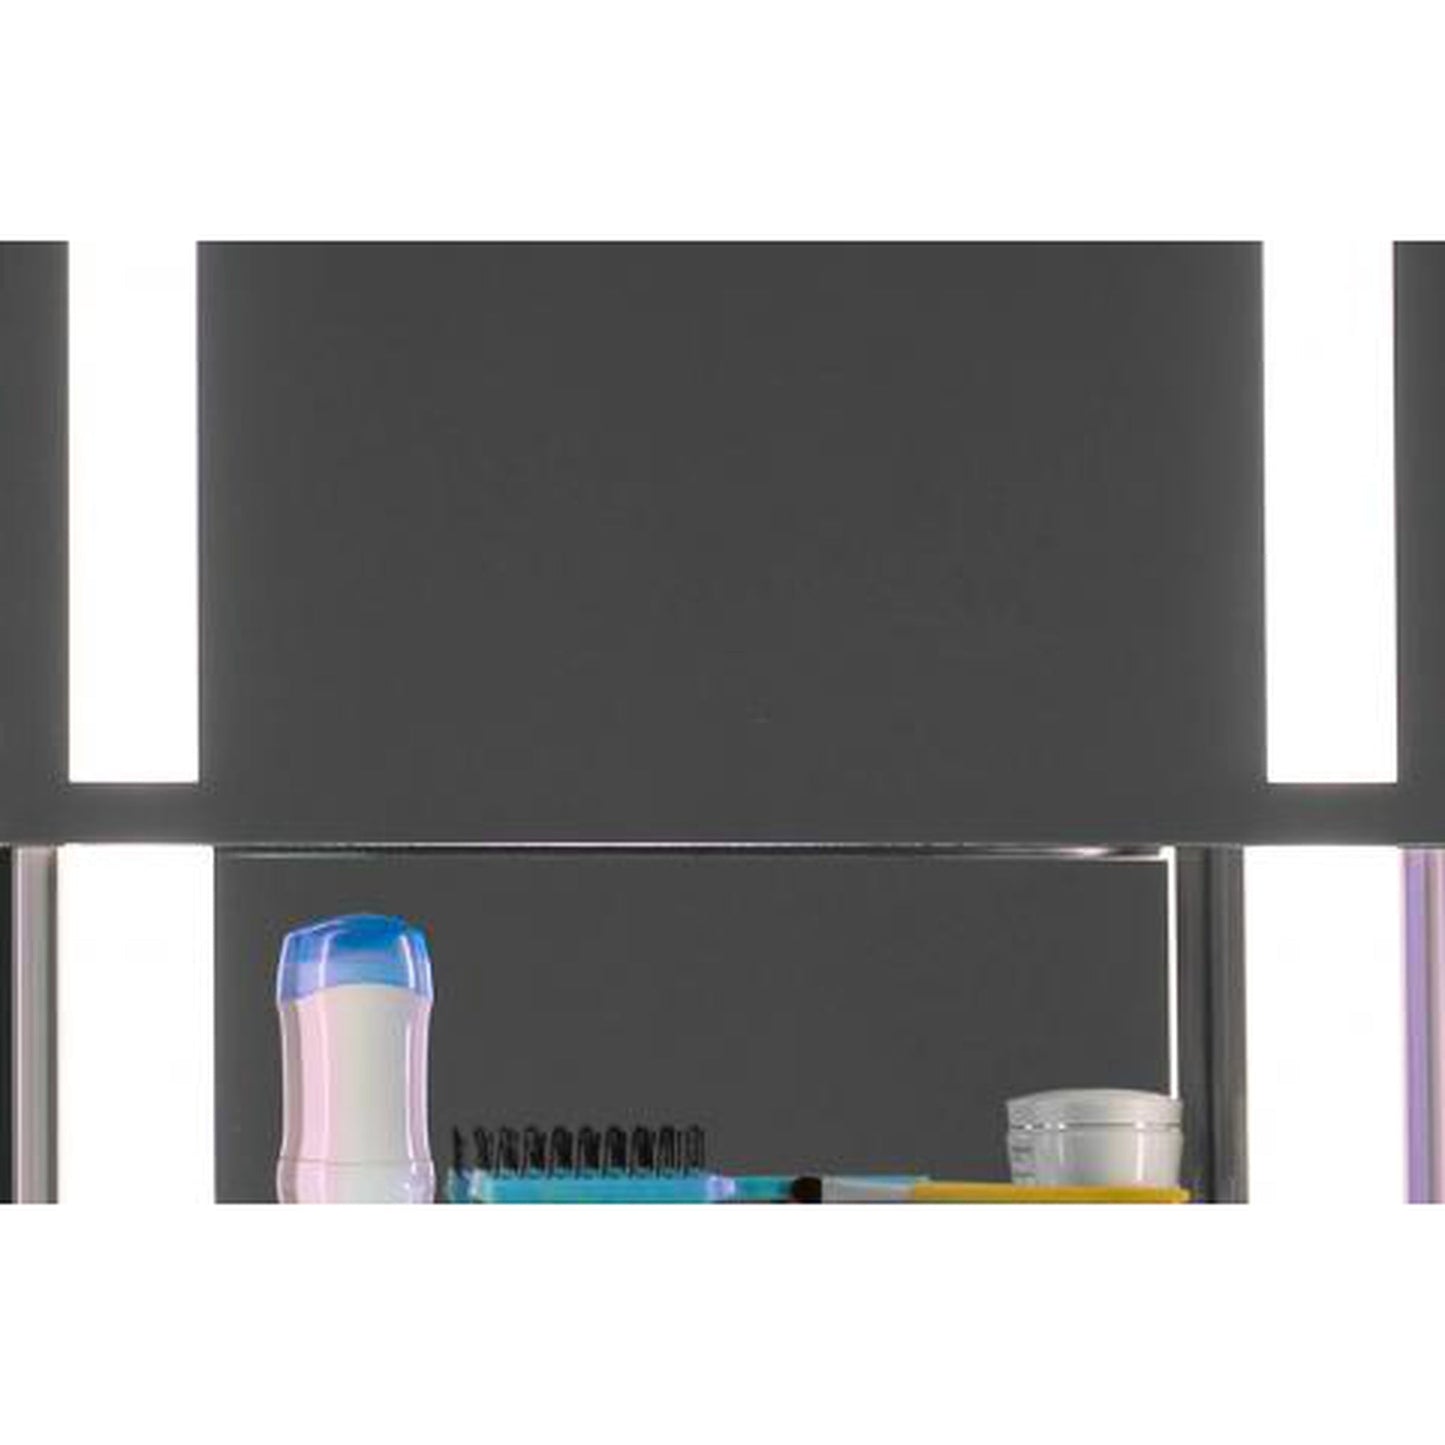 Sidler SideLight 47" x 29" 3000K Single Gliding Mirror Door Anodized Aluminum Medicine Cabinet With Built-in GFCI Outlet and USB port